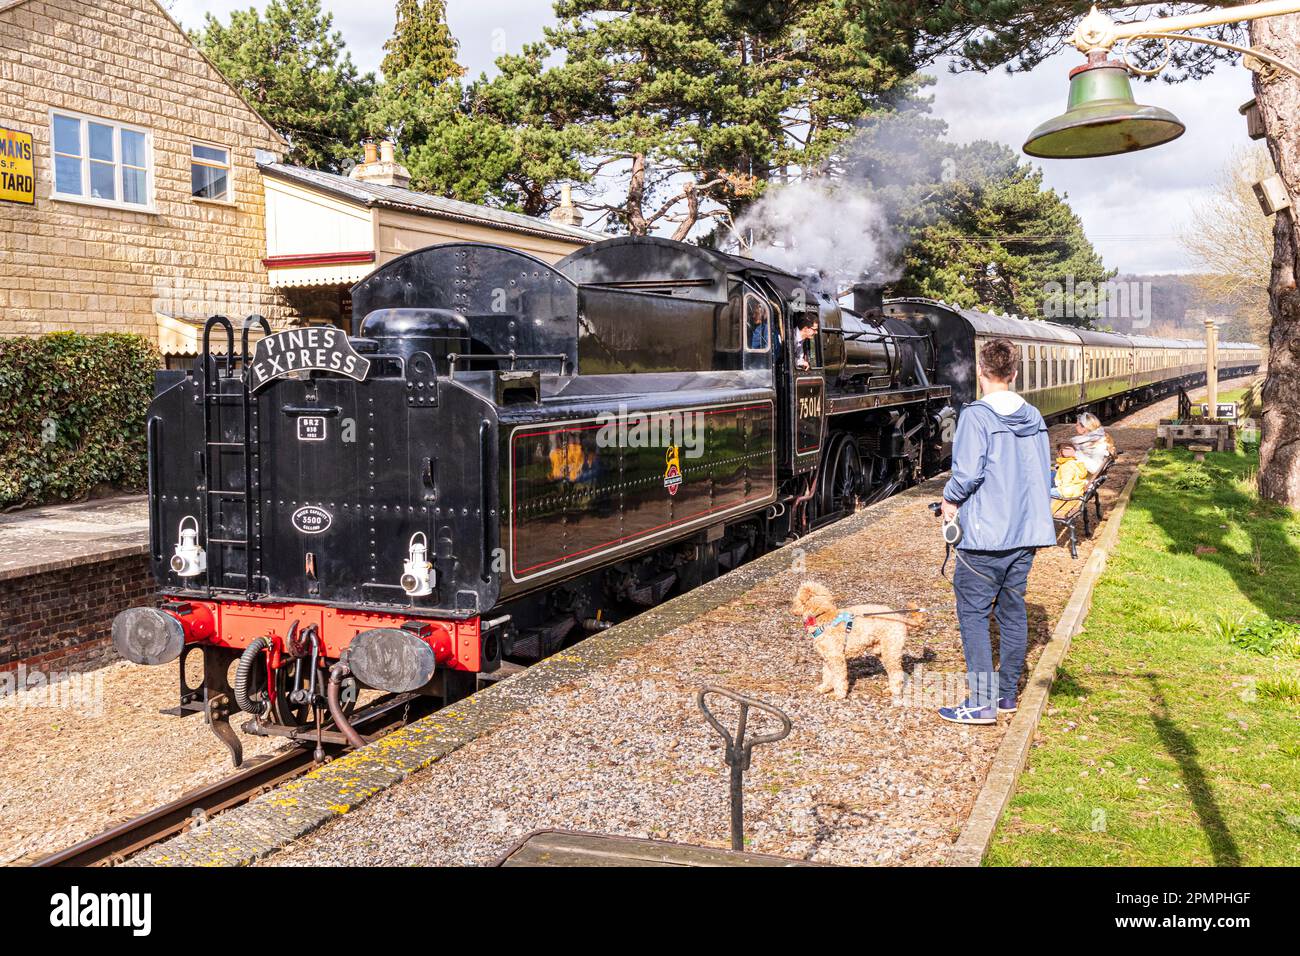 Passengers & dog awaiting the arrival of a steam train pulled by Braveheart, British Railways Standard class 4 4-6-0 No. 75014 at Gotherington Station Stock Photo